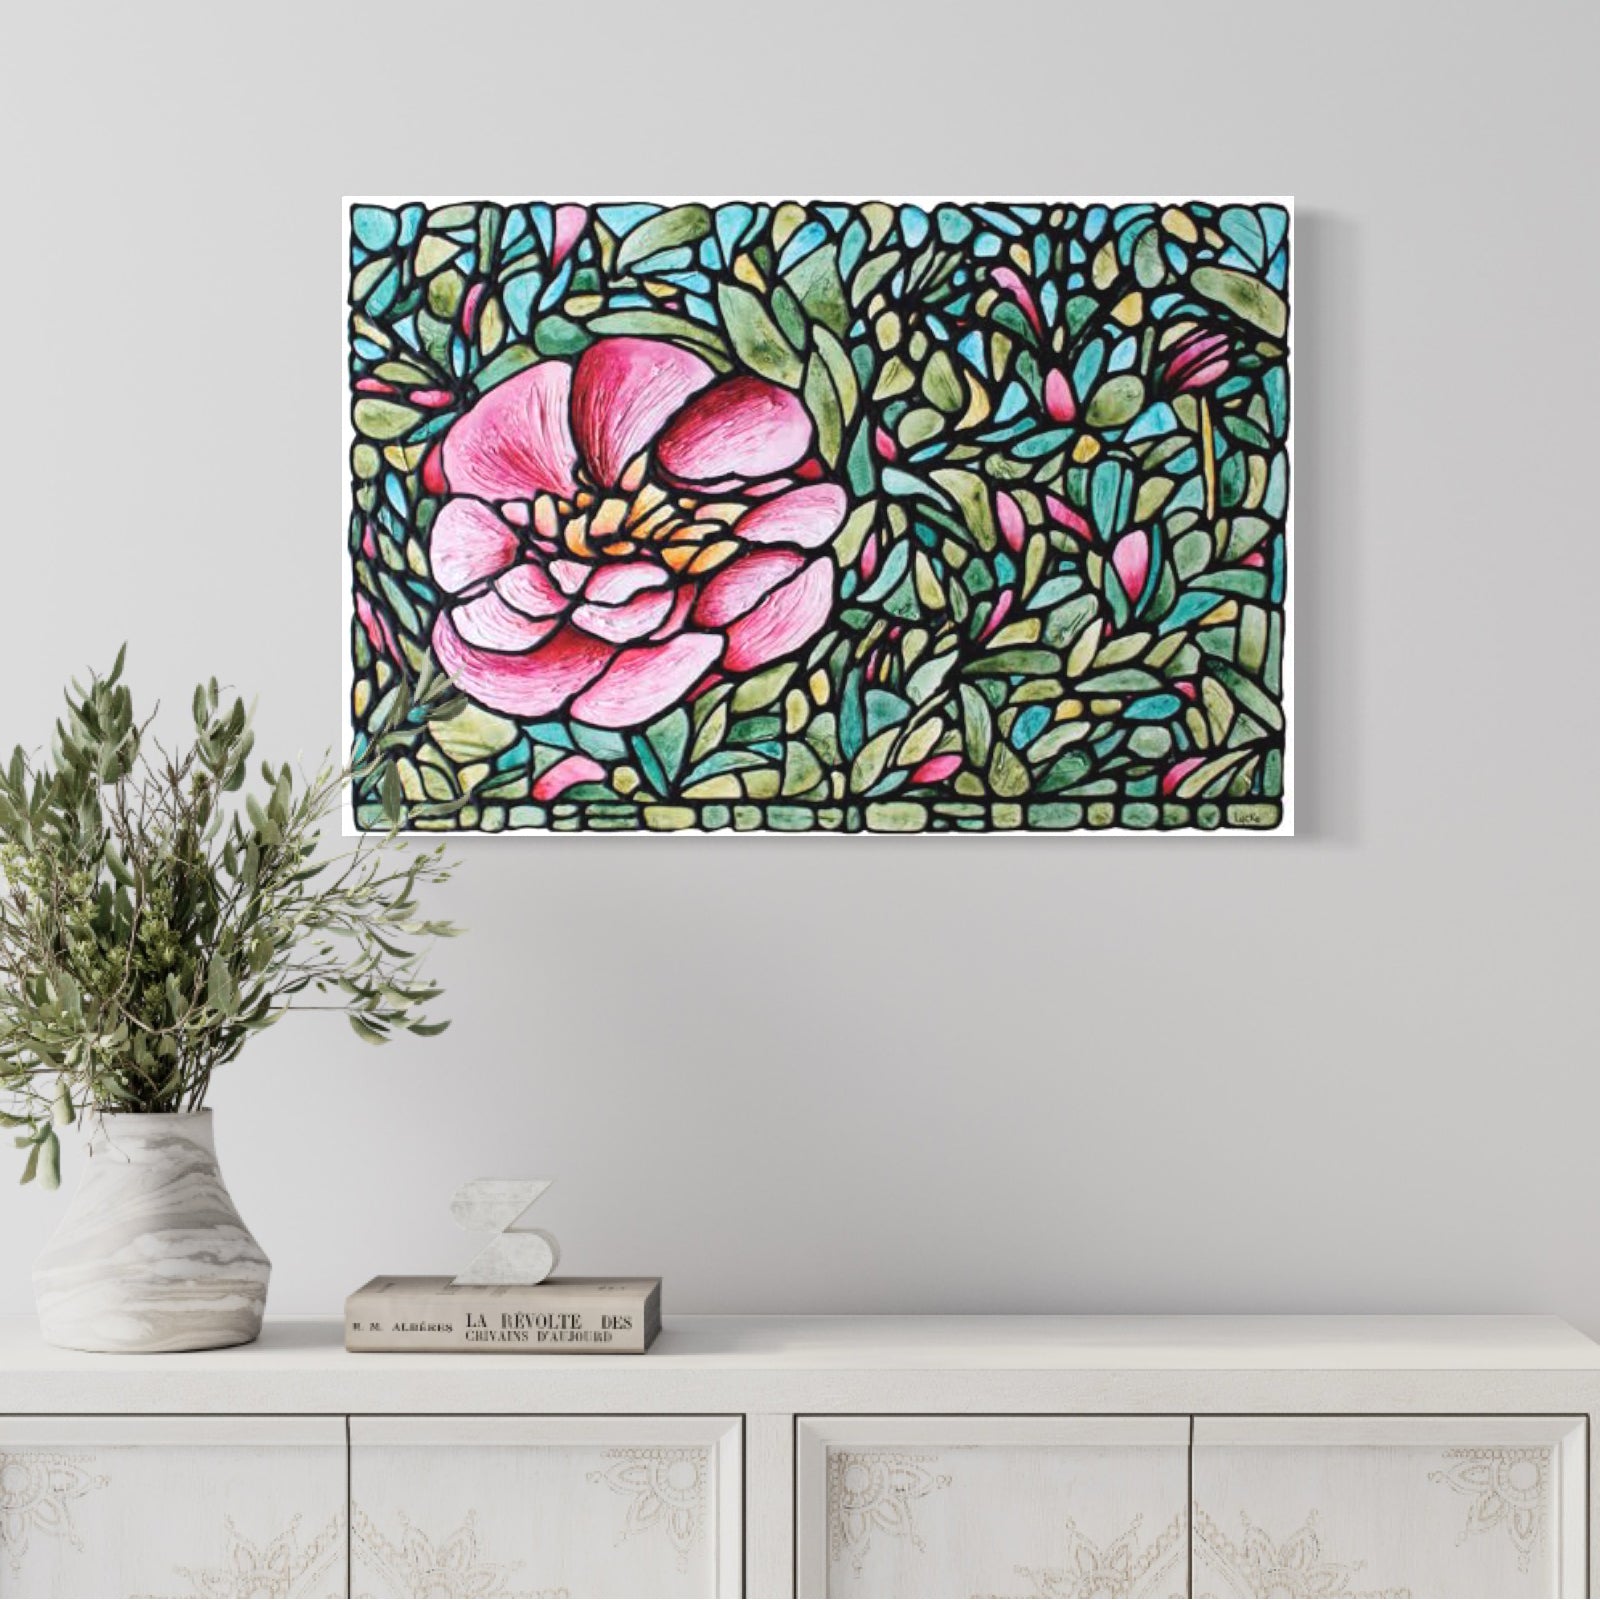 Peony Flower Original Painting 30 x 20 inches